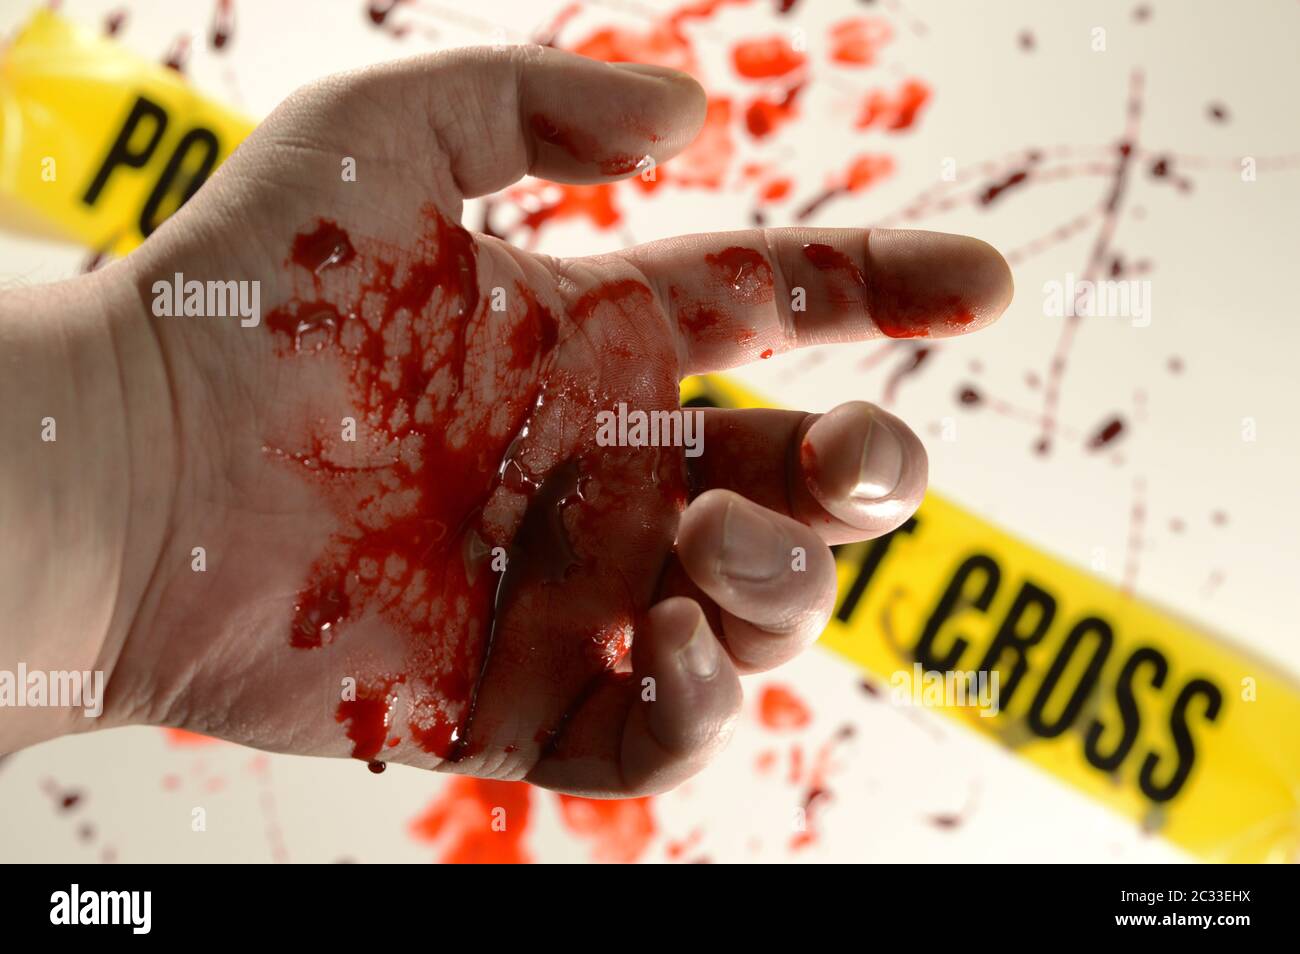 Closeup of a victim at a crime scene with bloody hands. Stock Photo